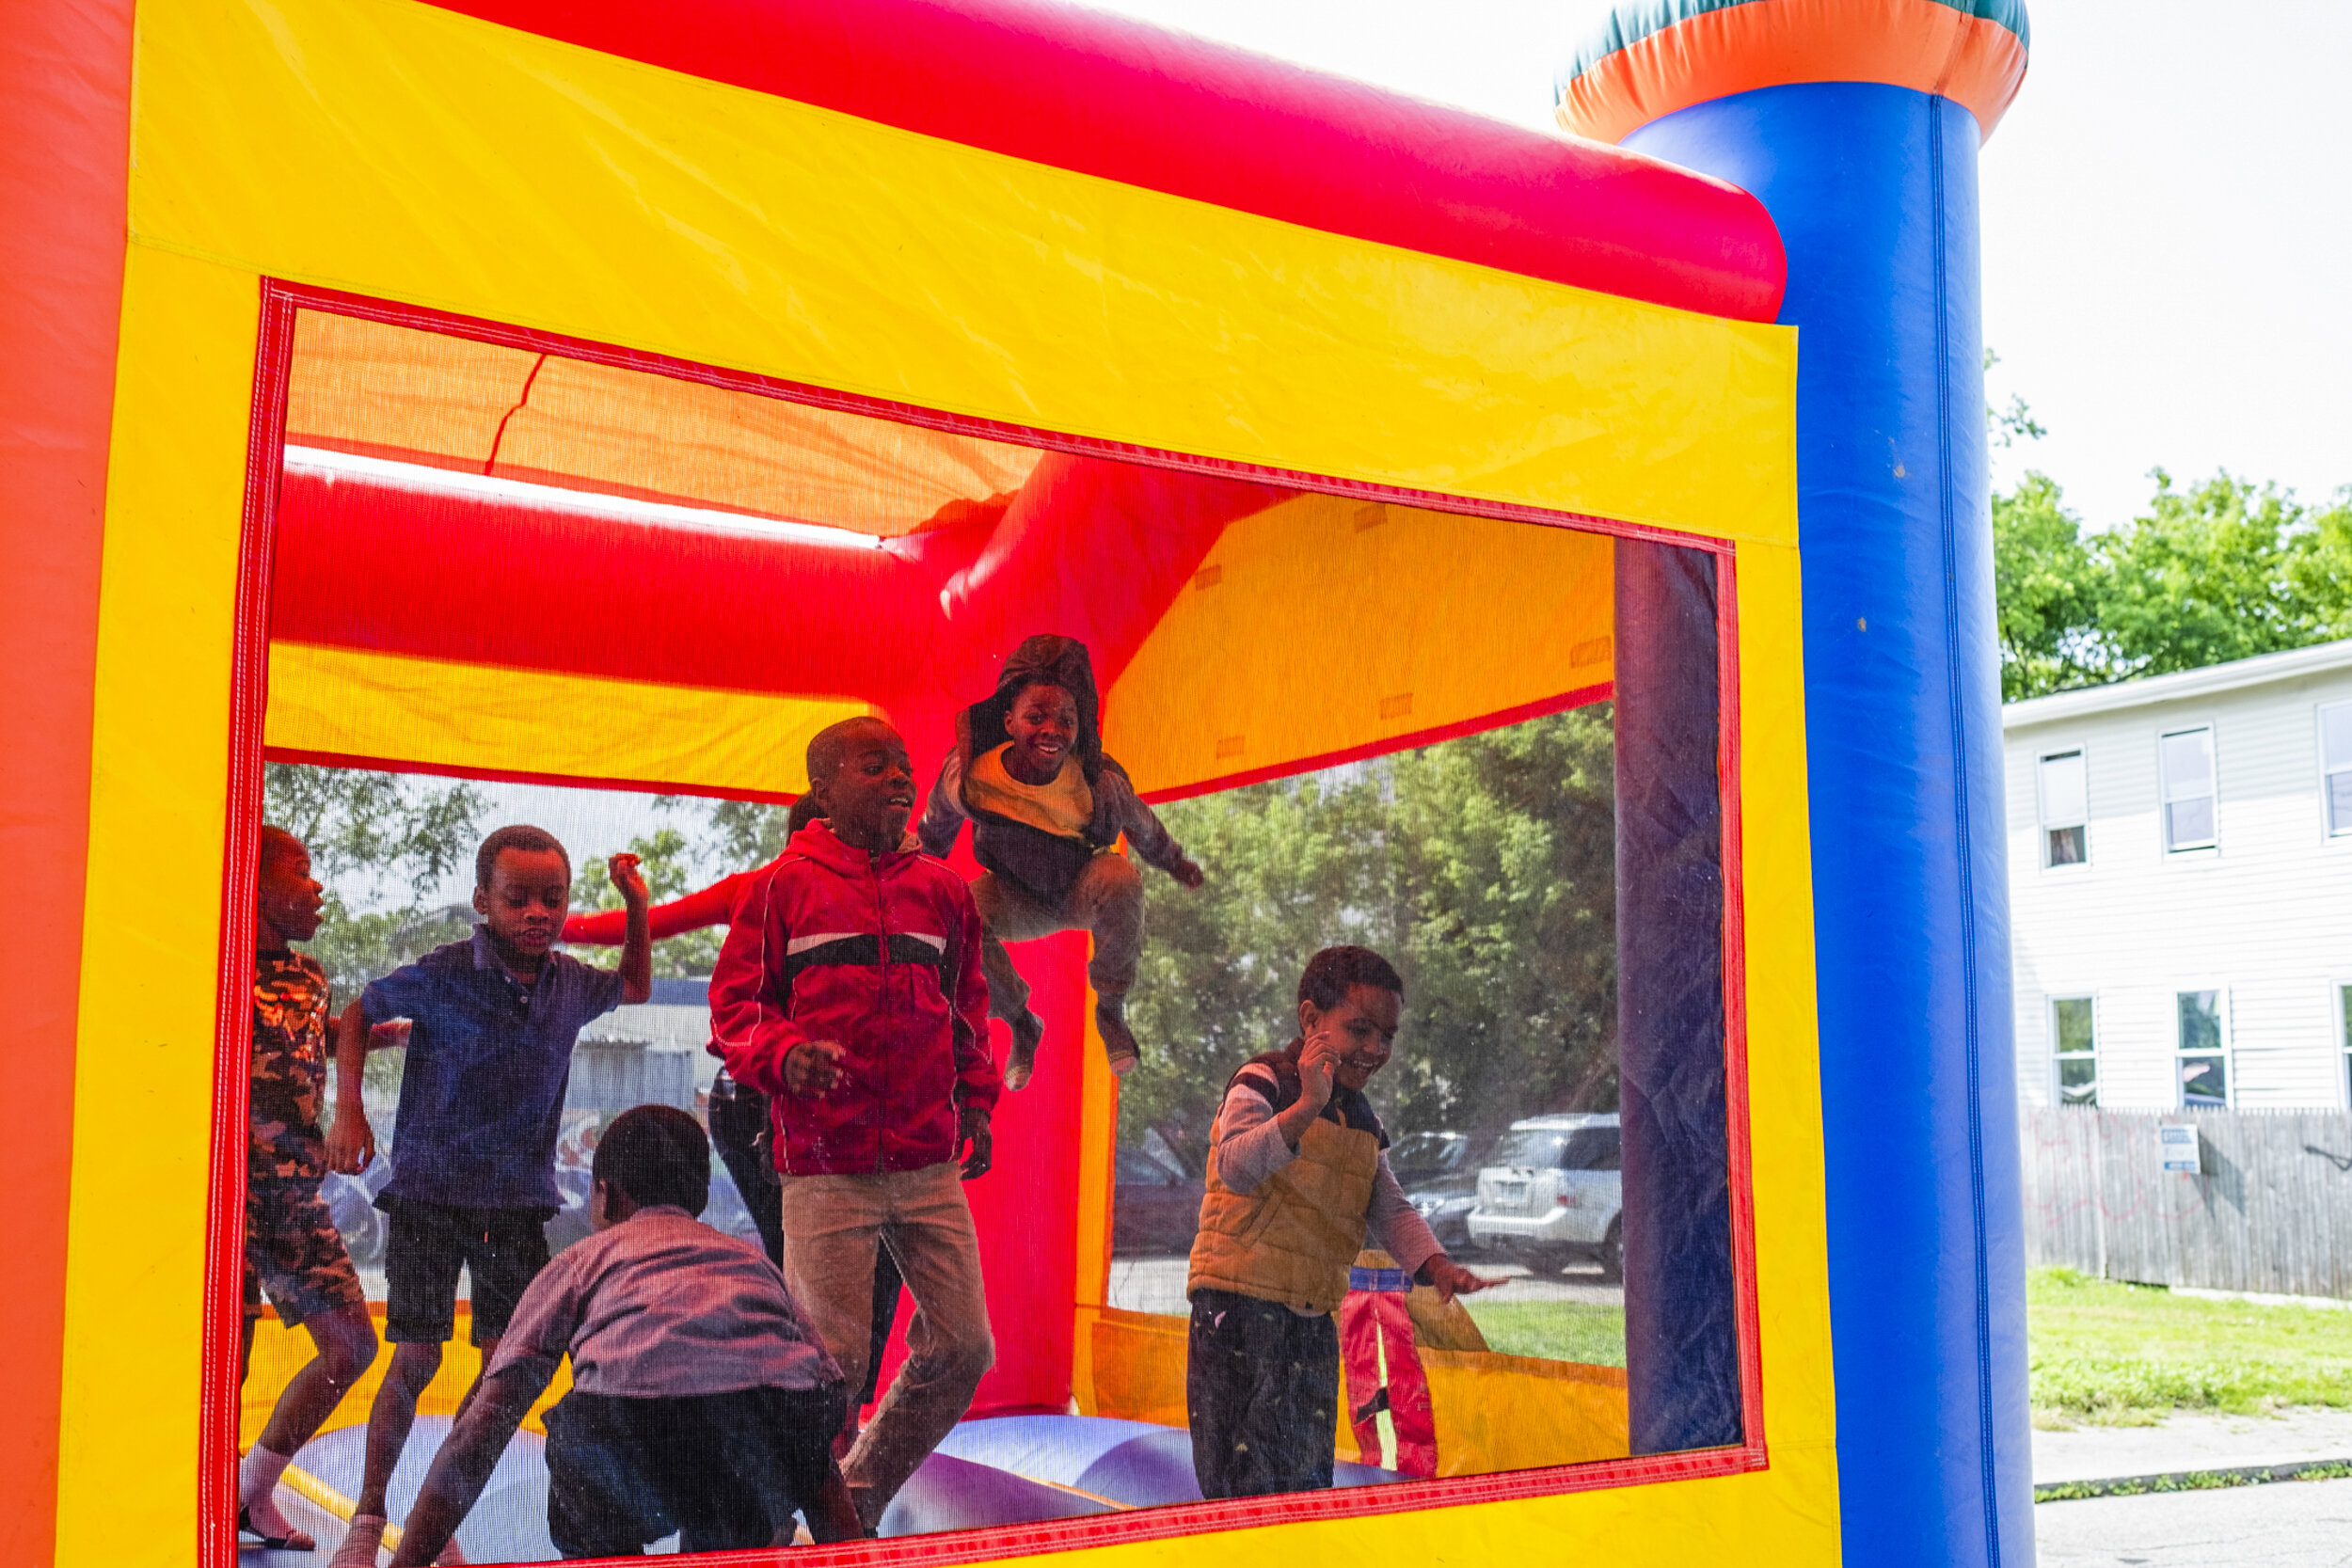  Children play in a bounce castle rented by the Refugee Dream Center  